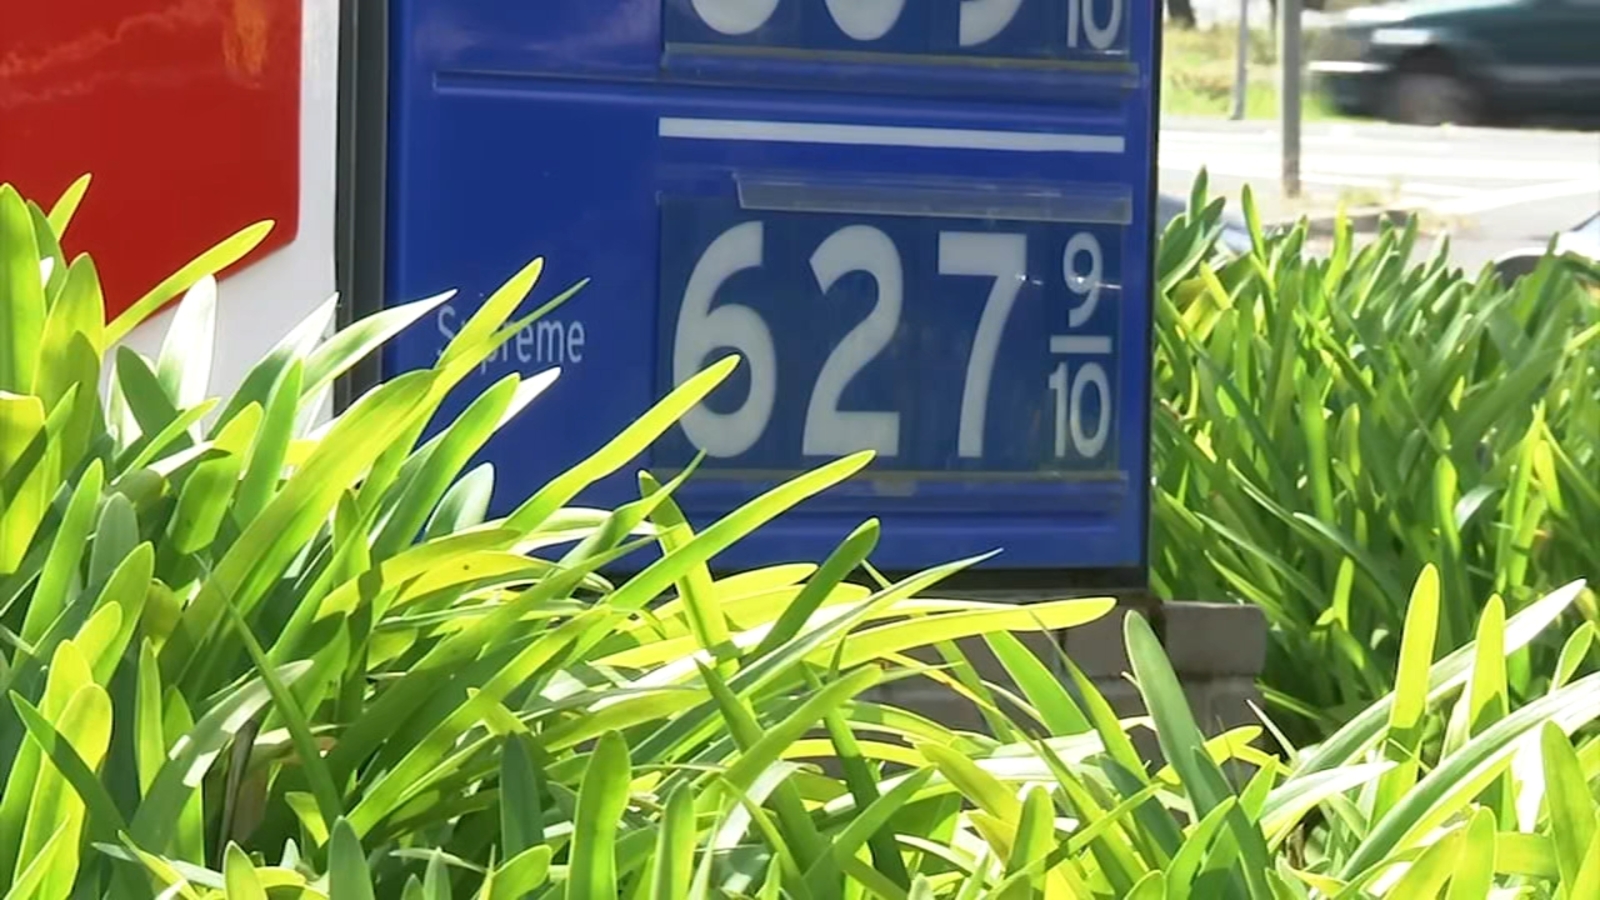 Bay Area gas prices: Why are they so high? Experts explain [Video]